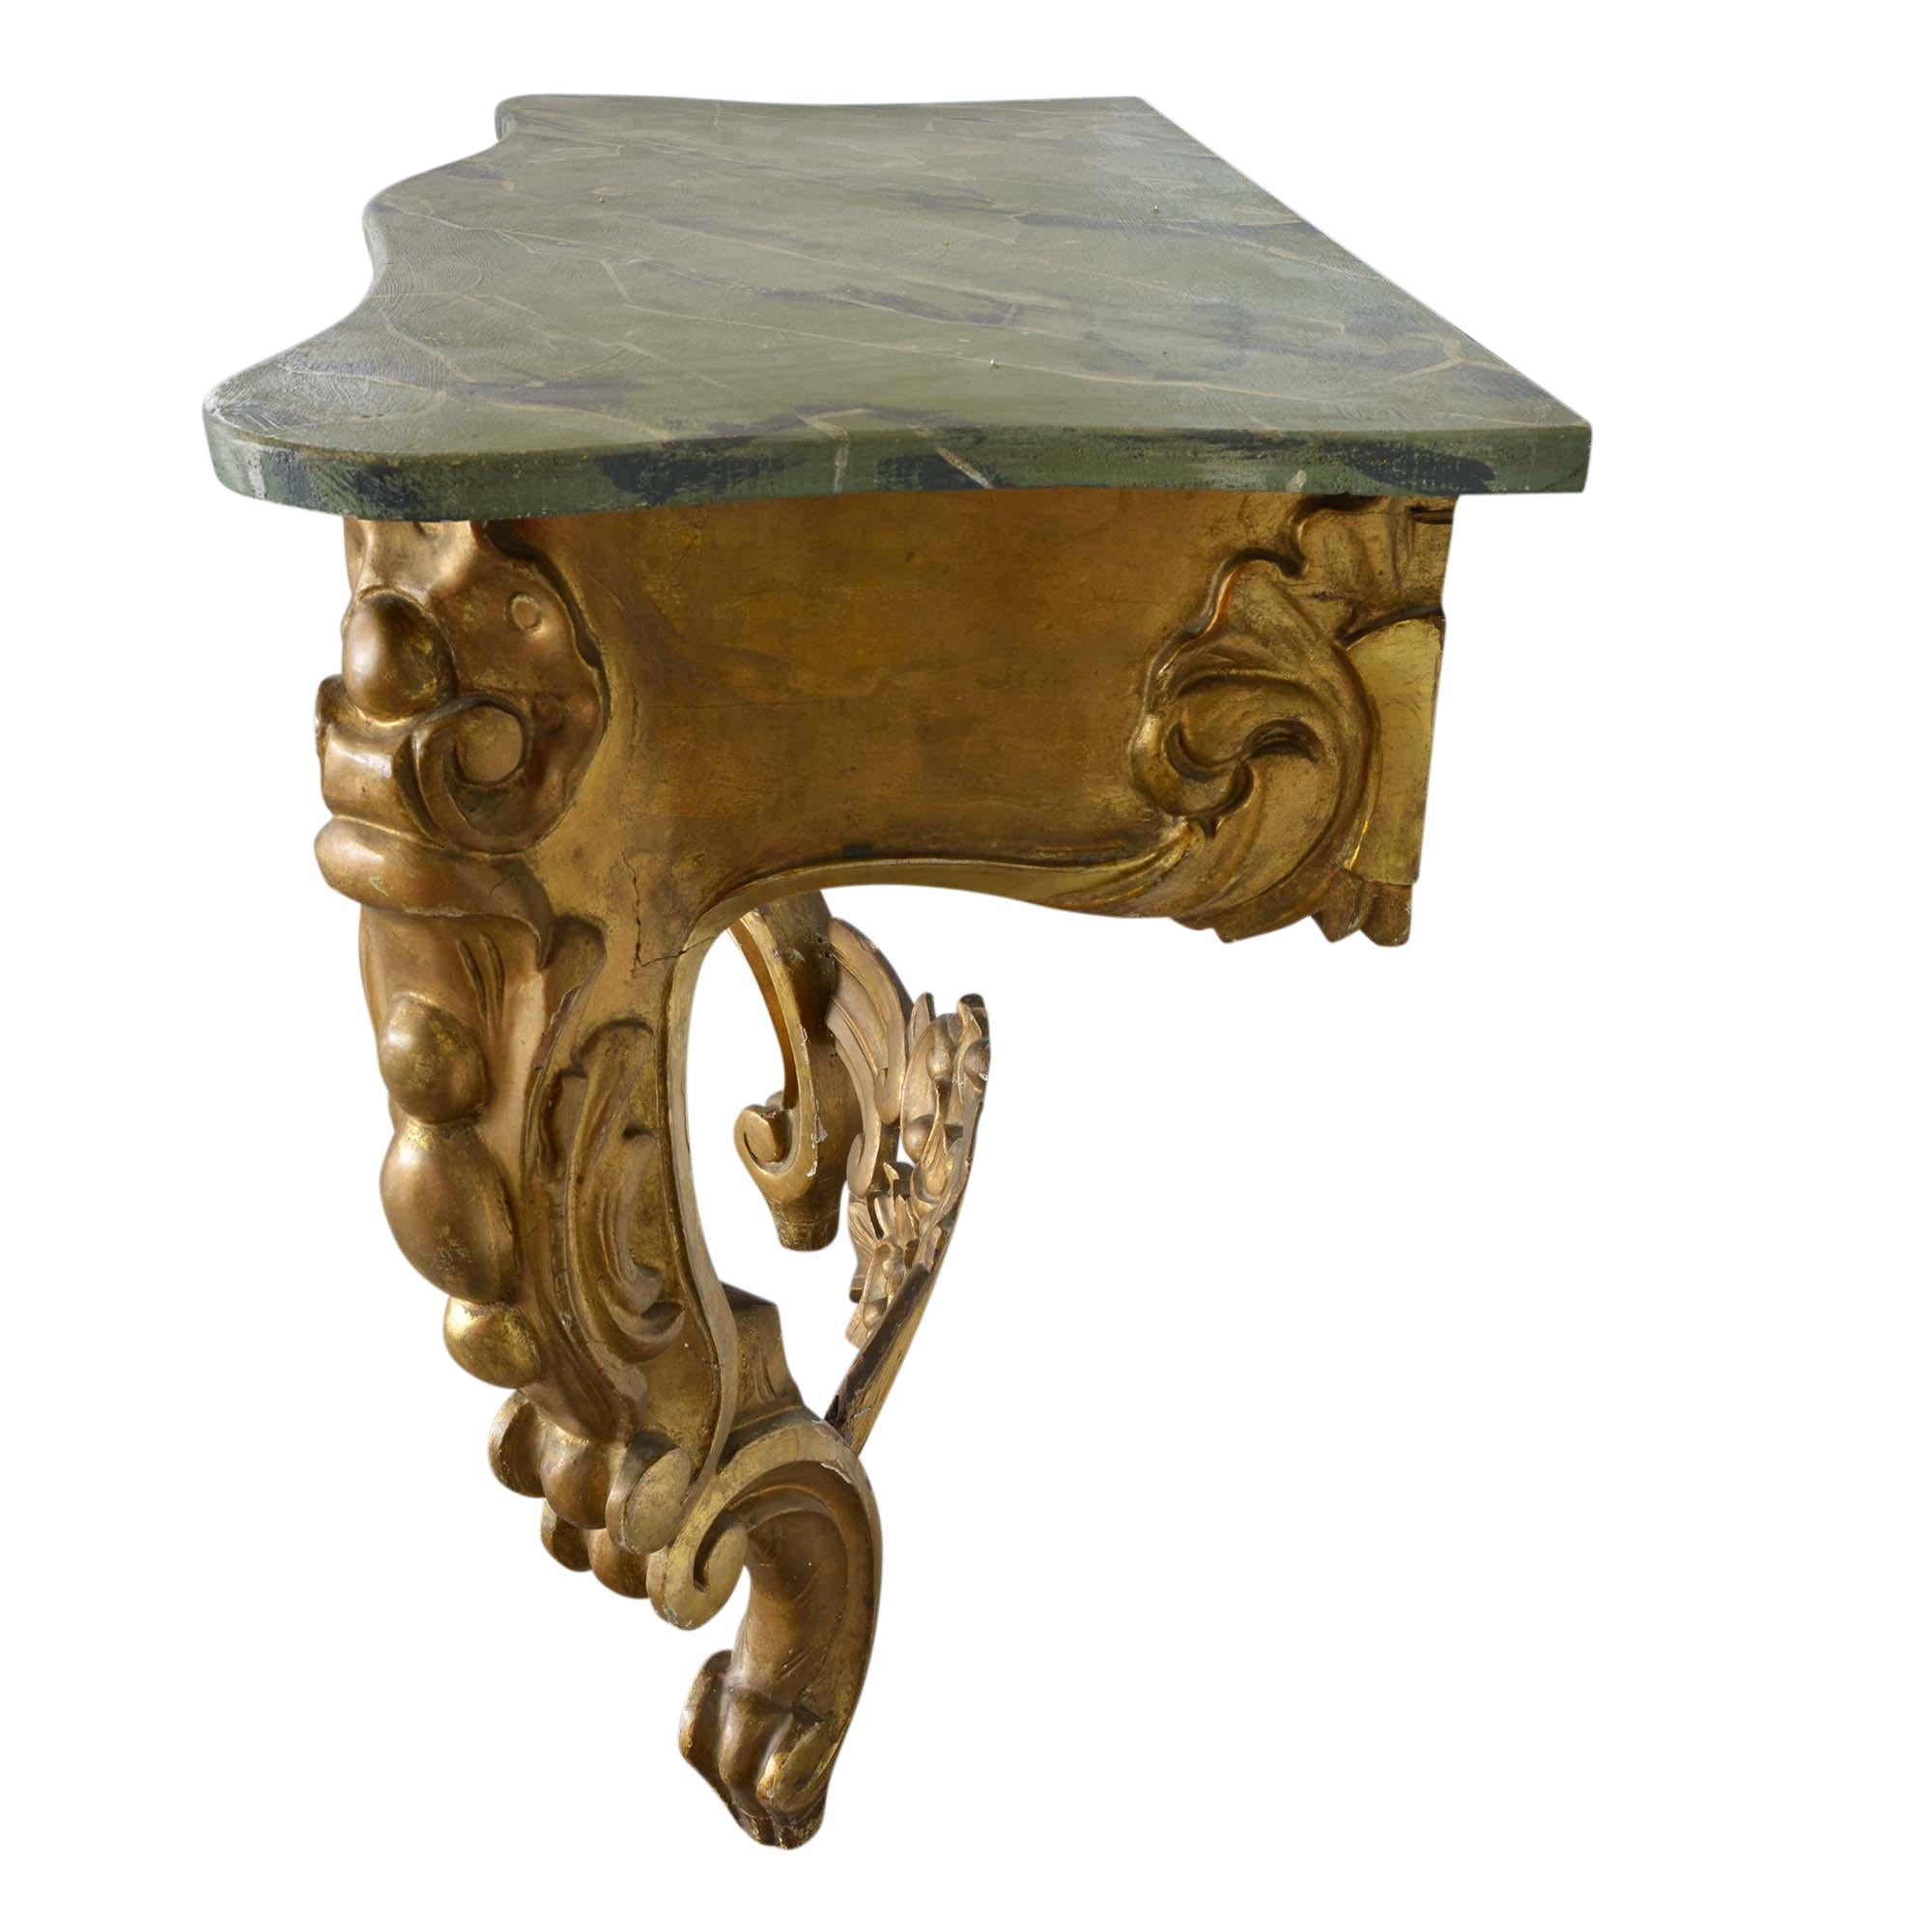 An outstanding carved giltwood console in the Louis XV style, it was likely carved early in the 20th century. The faux marble top is expertly painted to appear as rich green marble. The console top sits atop a refined base of giltwood with scrolled